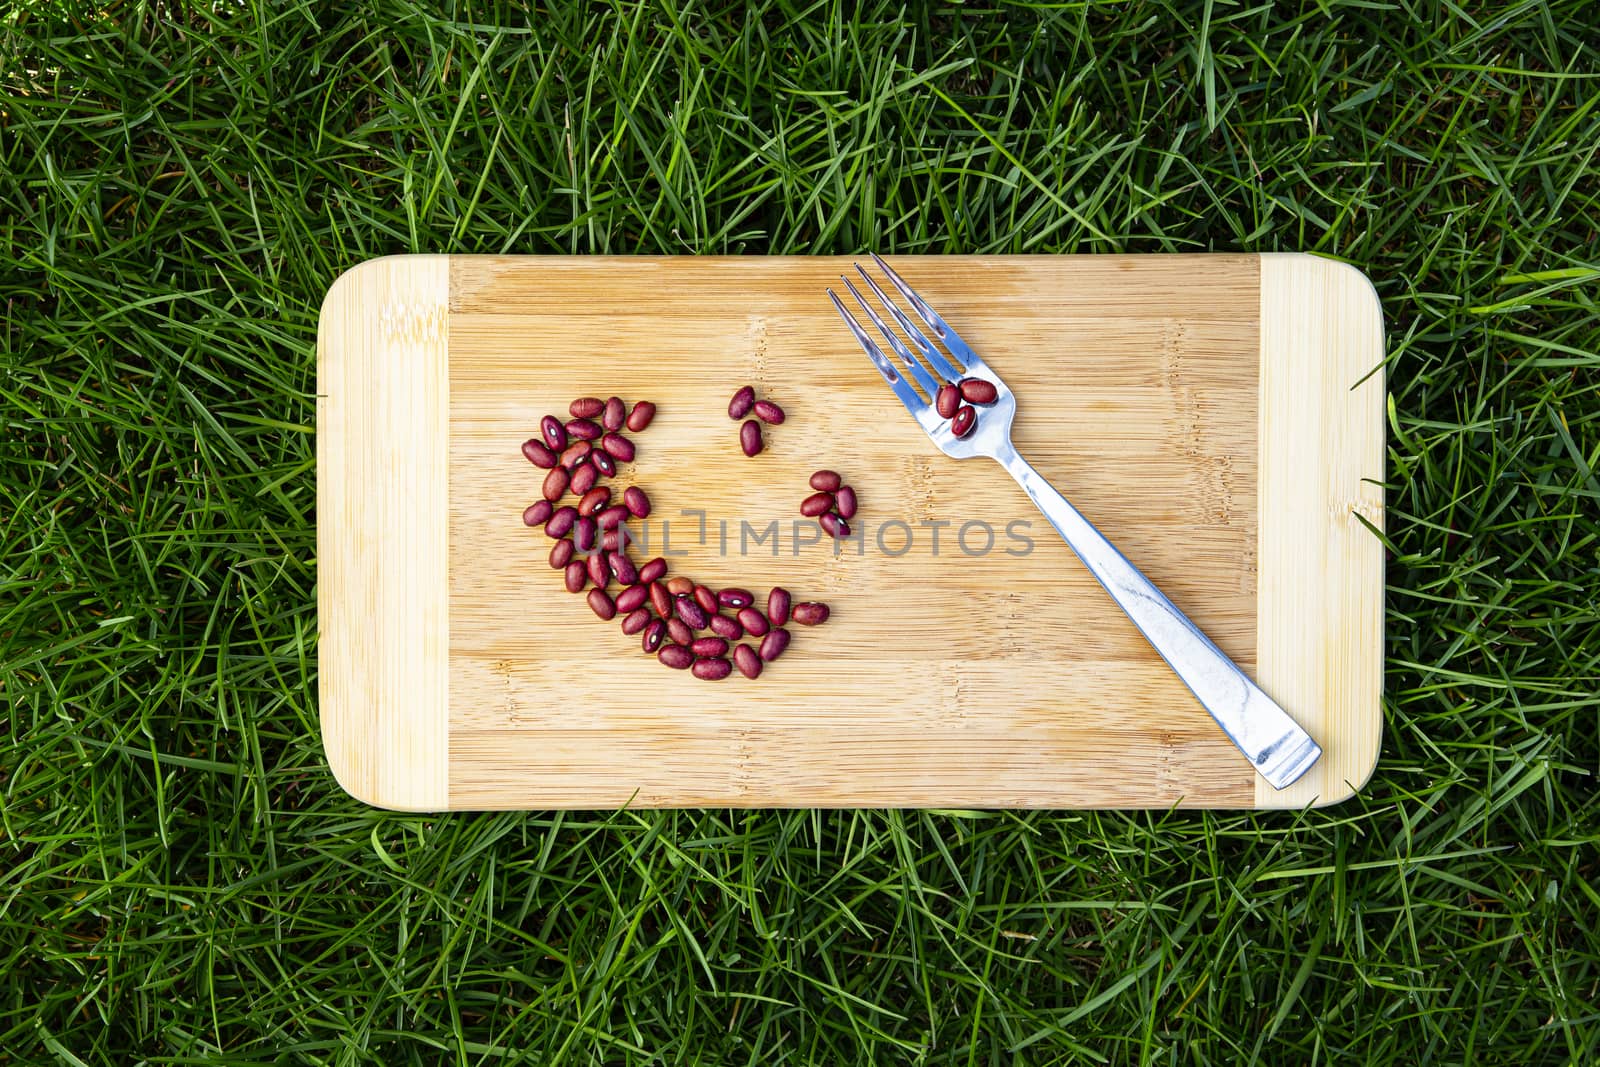 dried red beans, placed in a shape of a smiling face, on top of a wood board, with a metal fork, on top of green grass